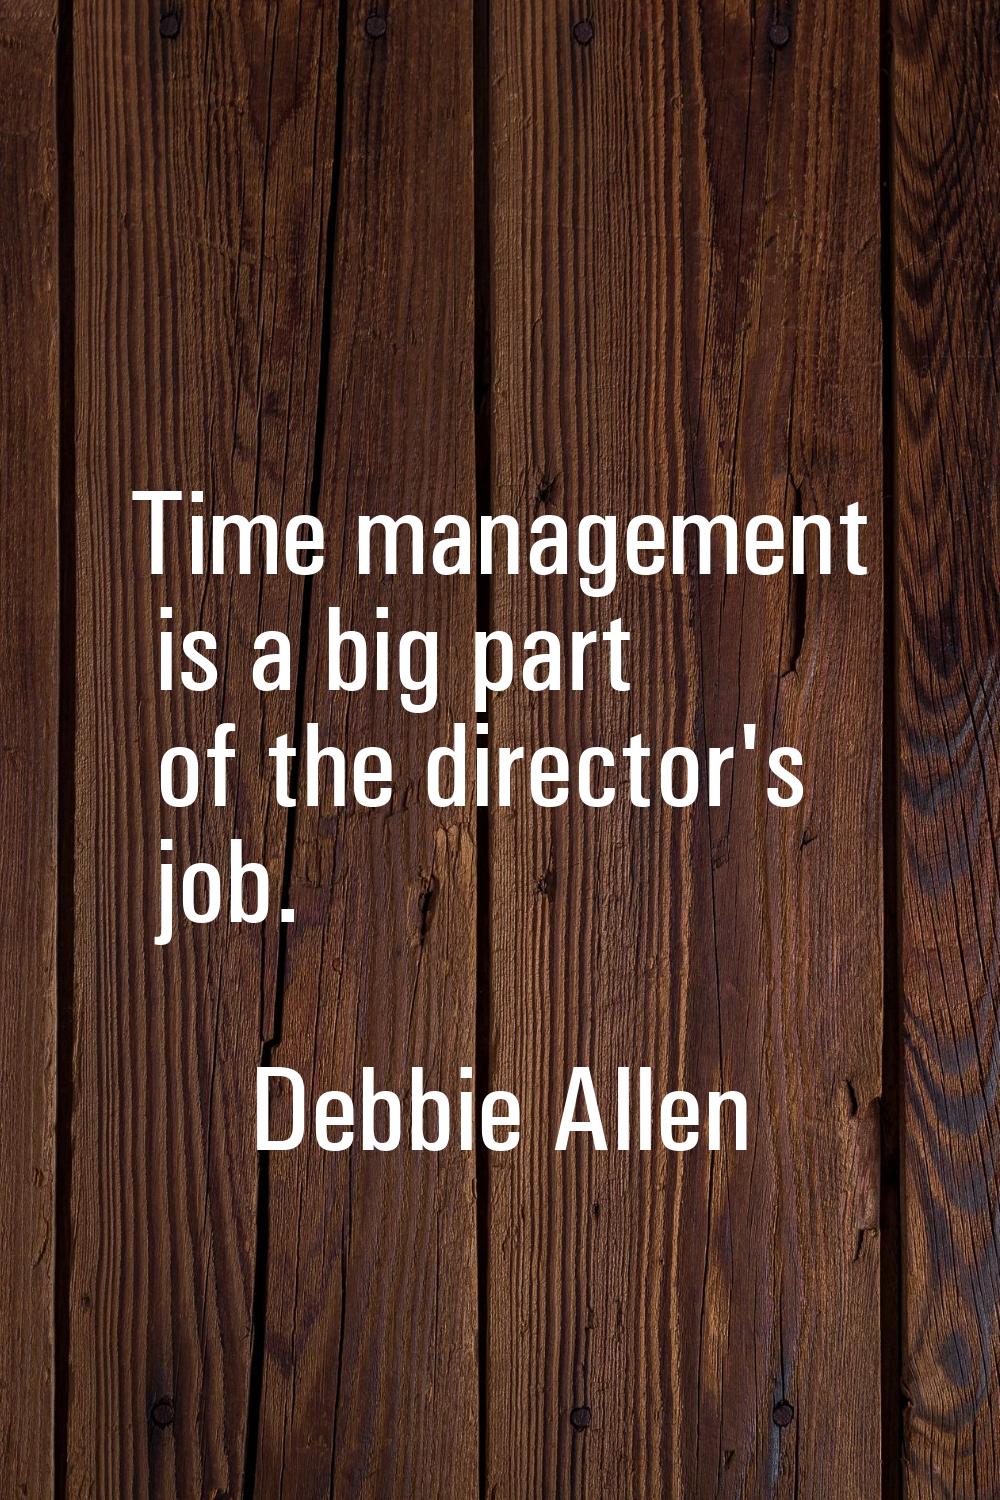 Time management is a big part of the director's job.